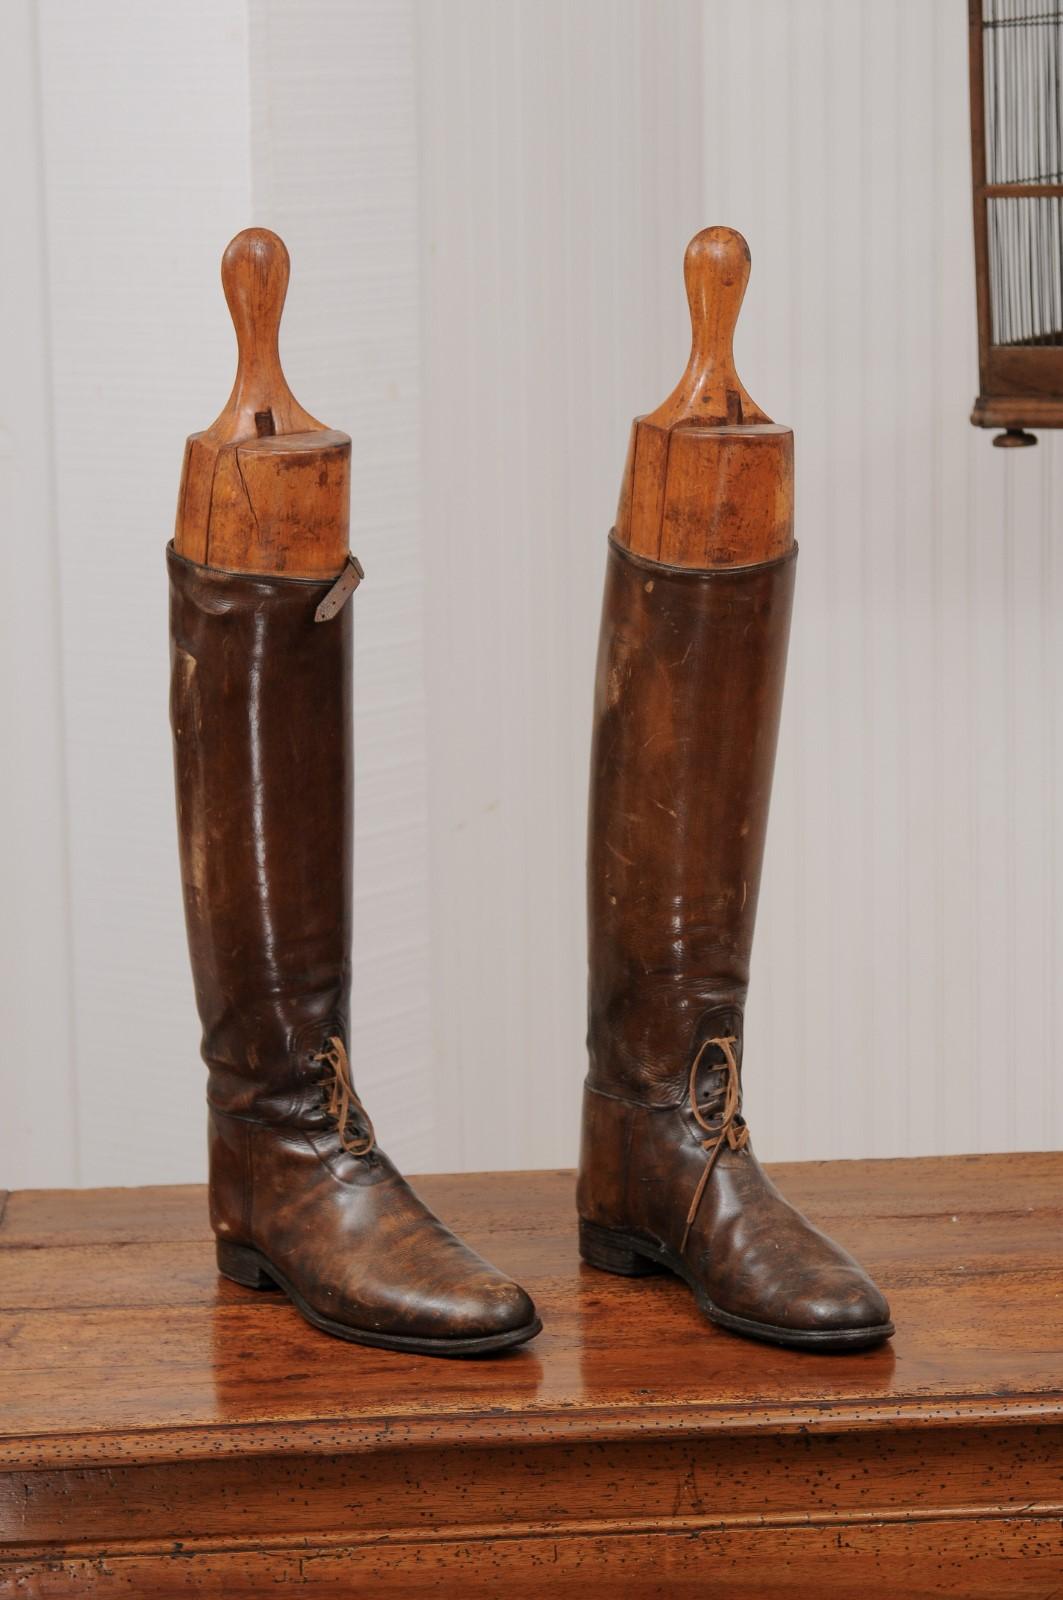 A pair of English Victorian period leather riding boots from the late 19th century, with wooden boot trees. Created in England during the last decade of the 19th century, each of this pair of leather laced riding boots showcases its tree made to